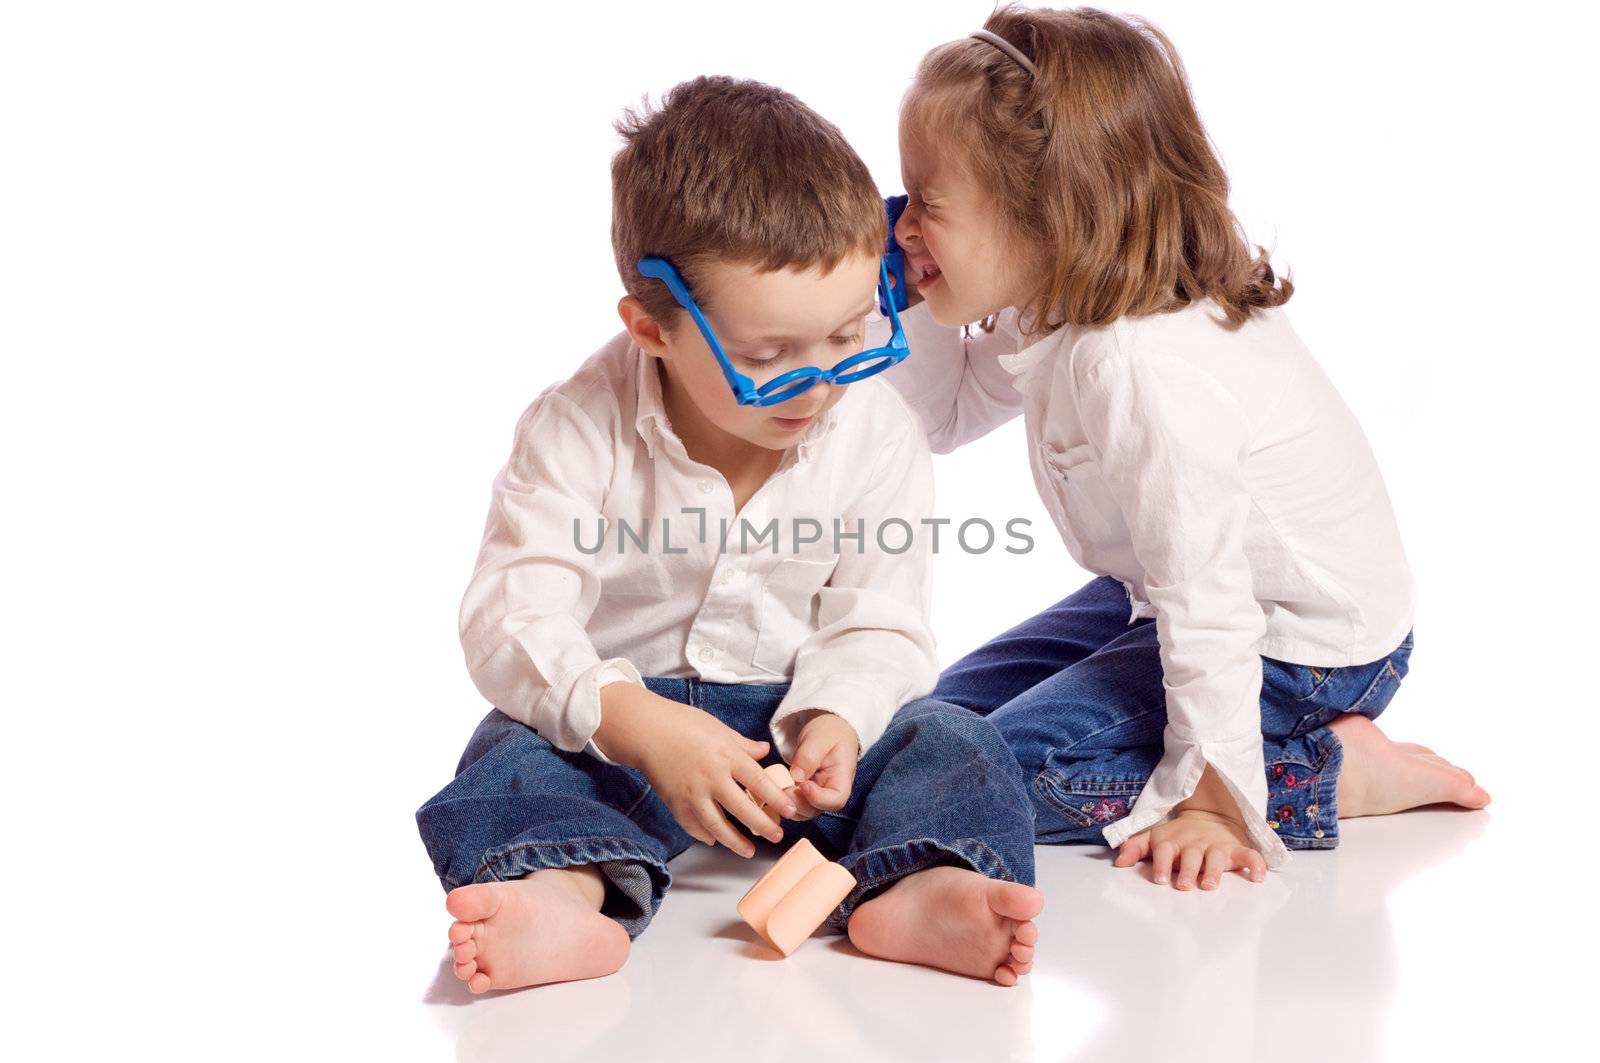 Cute little brother and sister playing doctor